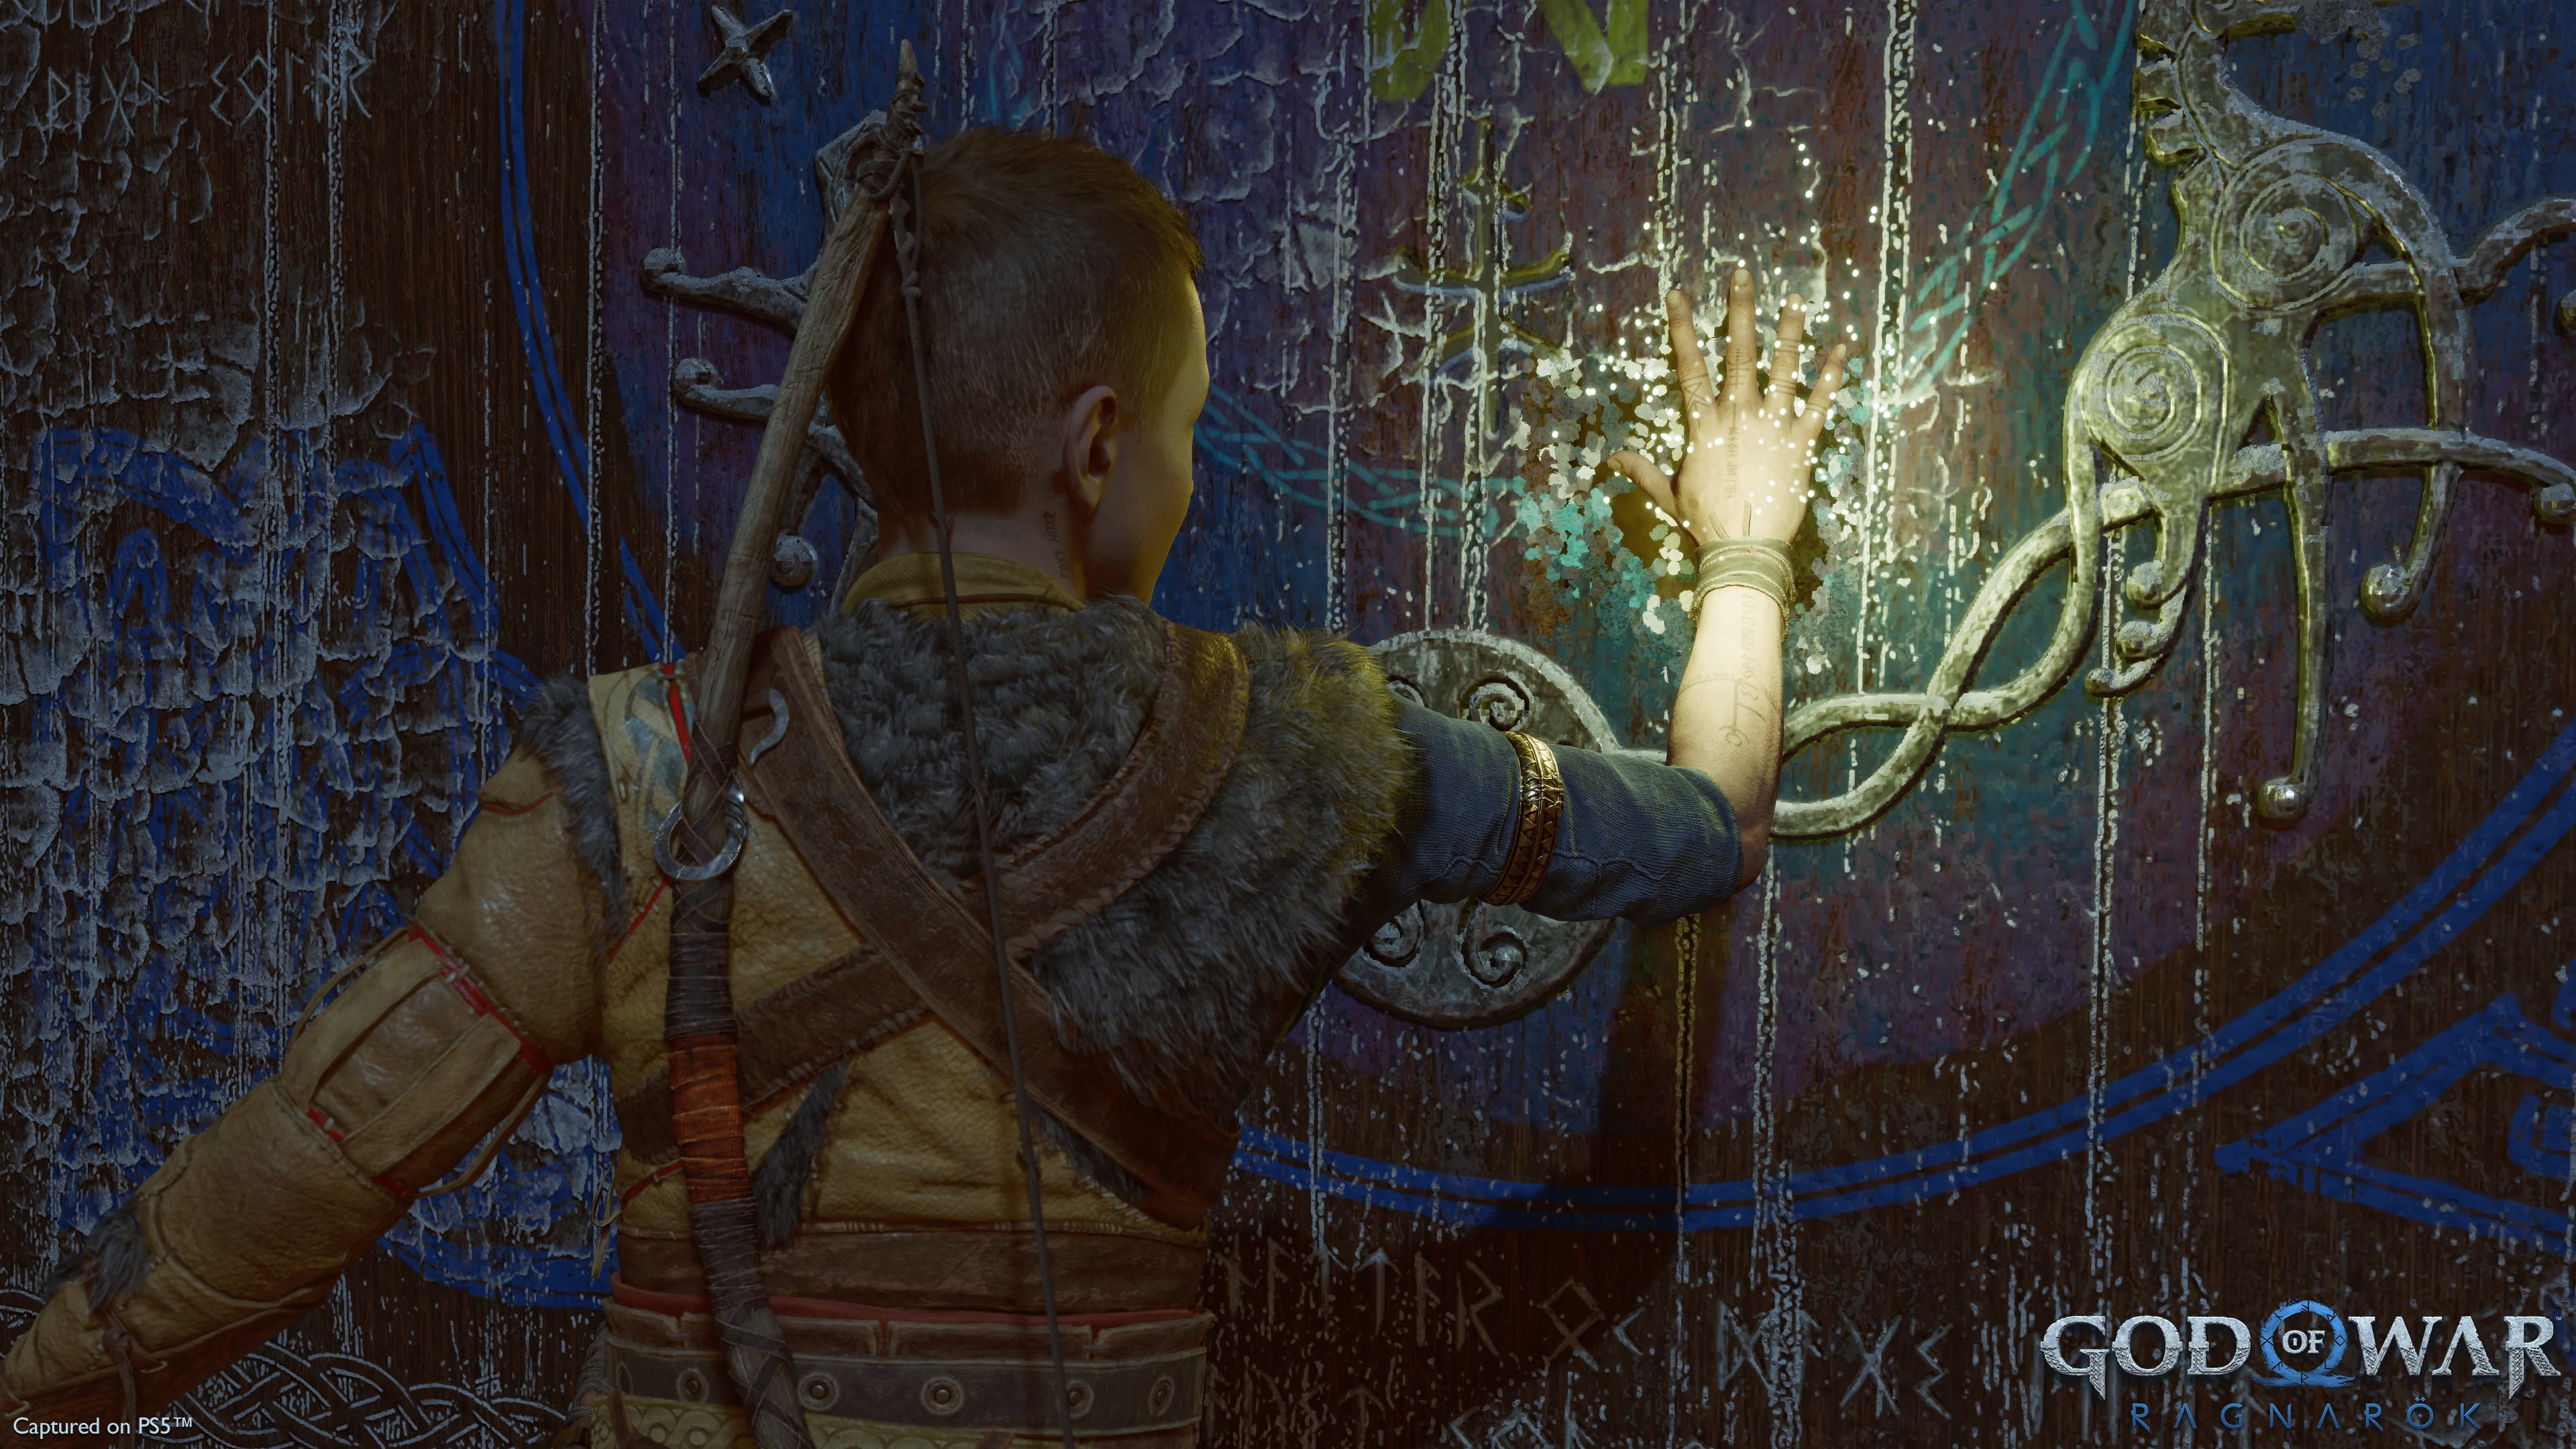 I feel like there's more to discuss here ATREUS opens the door